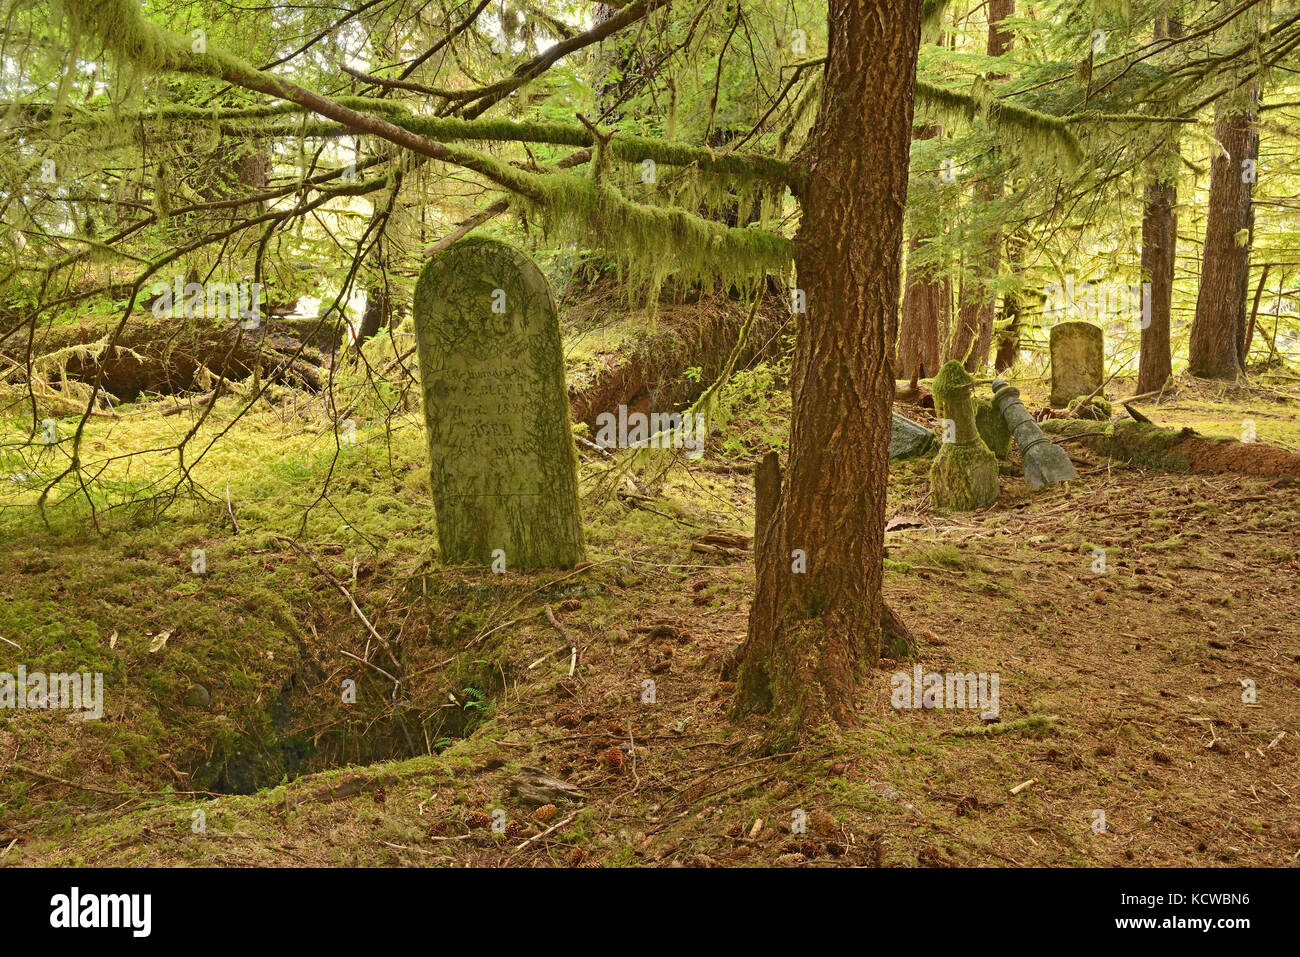 Pre 1900 burials at Mathers Creek on Louise Island, Haida Gwaii. thought to be of persons who had lived in the village of Clue. After this era the Clue inhabitants relocated to Skidegate, British Columbia., Haida Gwaii (formerly the Queen Charlotte Islands), British Columbia, Canada Stock Photo